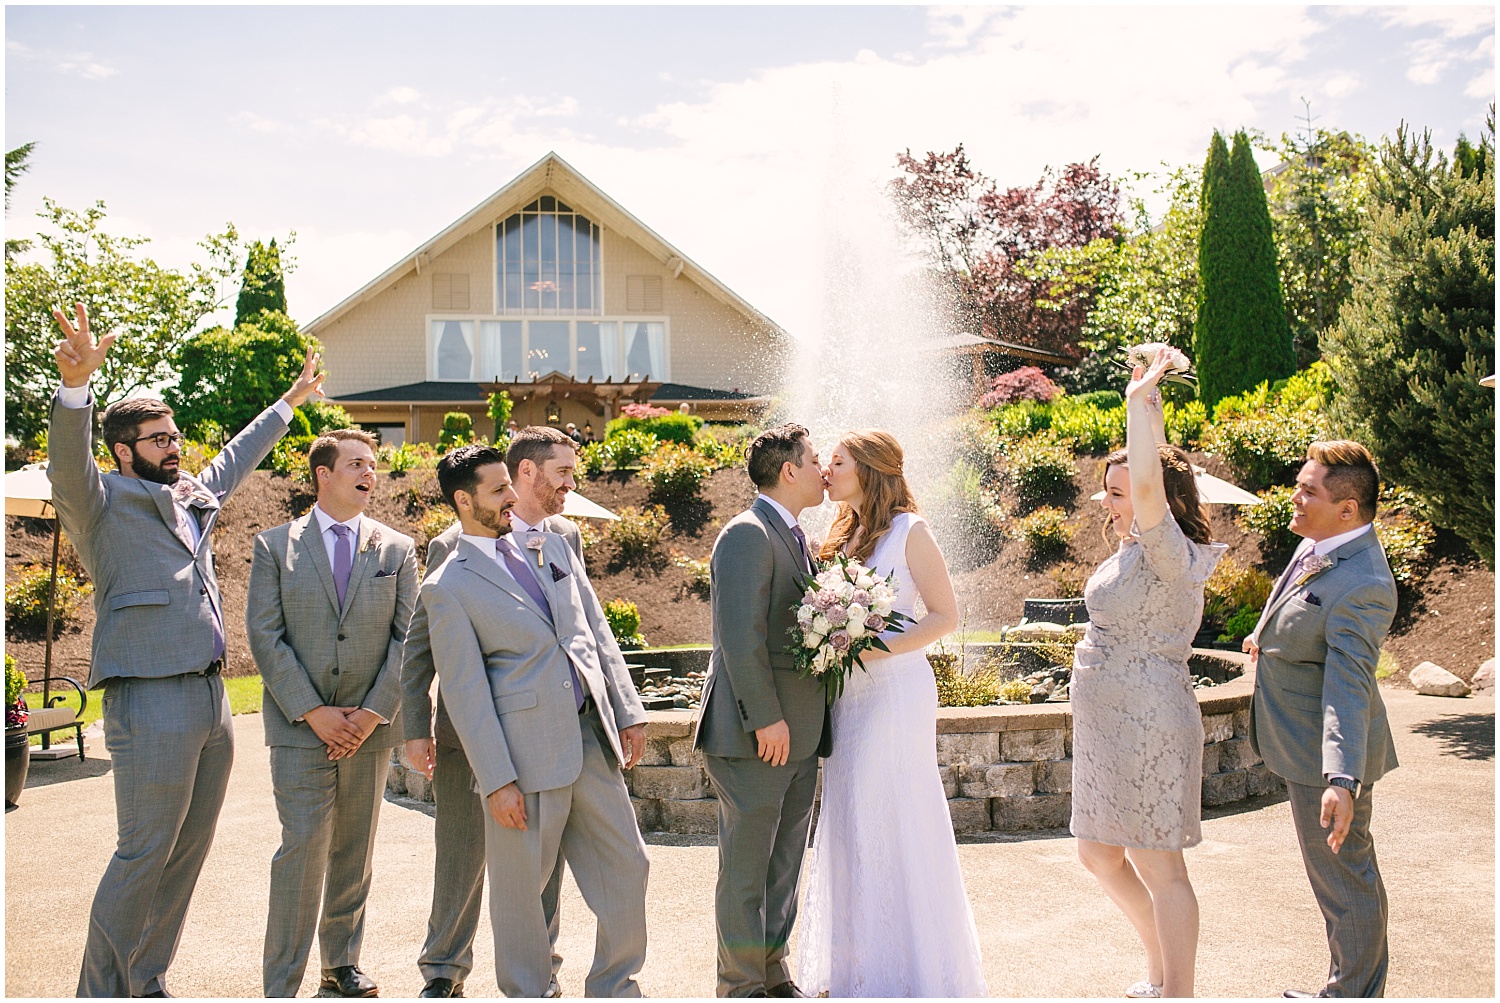 Wedding party cheers on the bride and groom at Lord Hill Farms wedding in Snohomish Washington